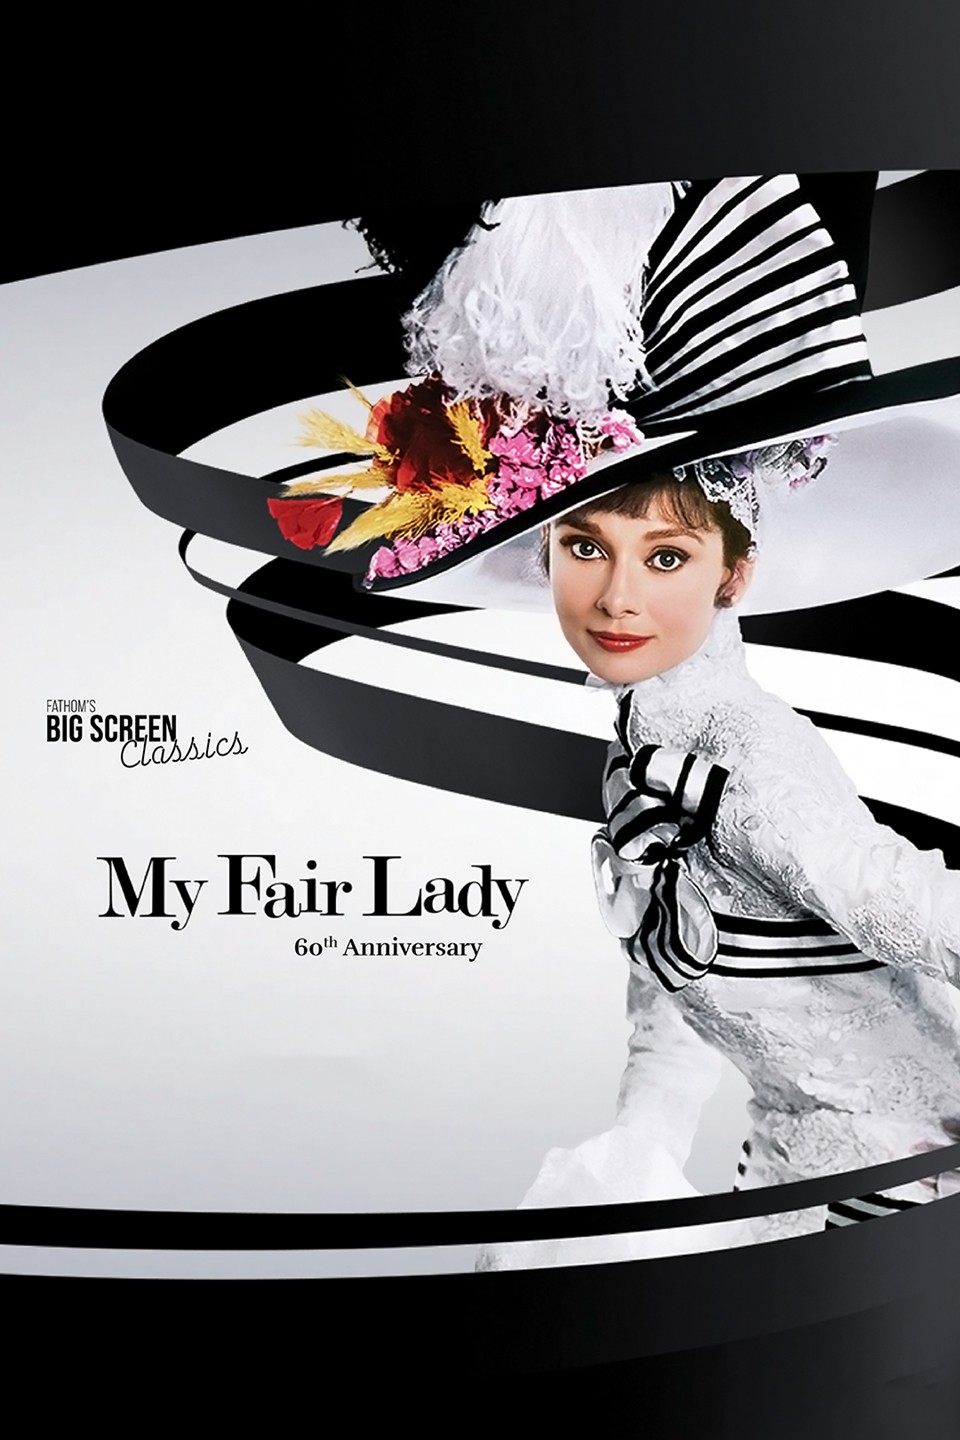 My Fair Lady Movie 1964: Why It's Much Less Sexist Than You Think